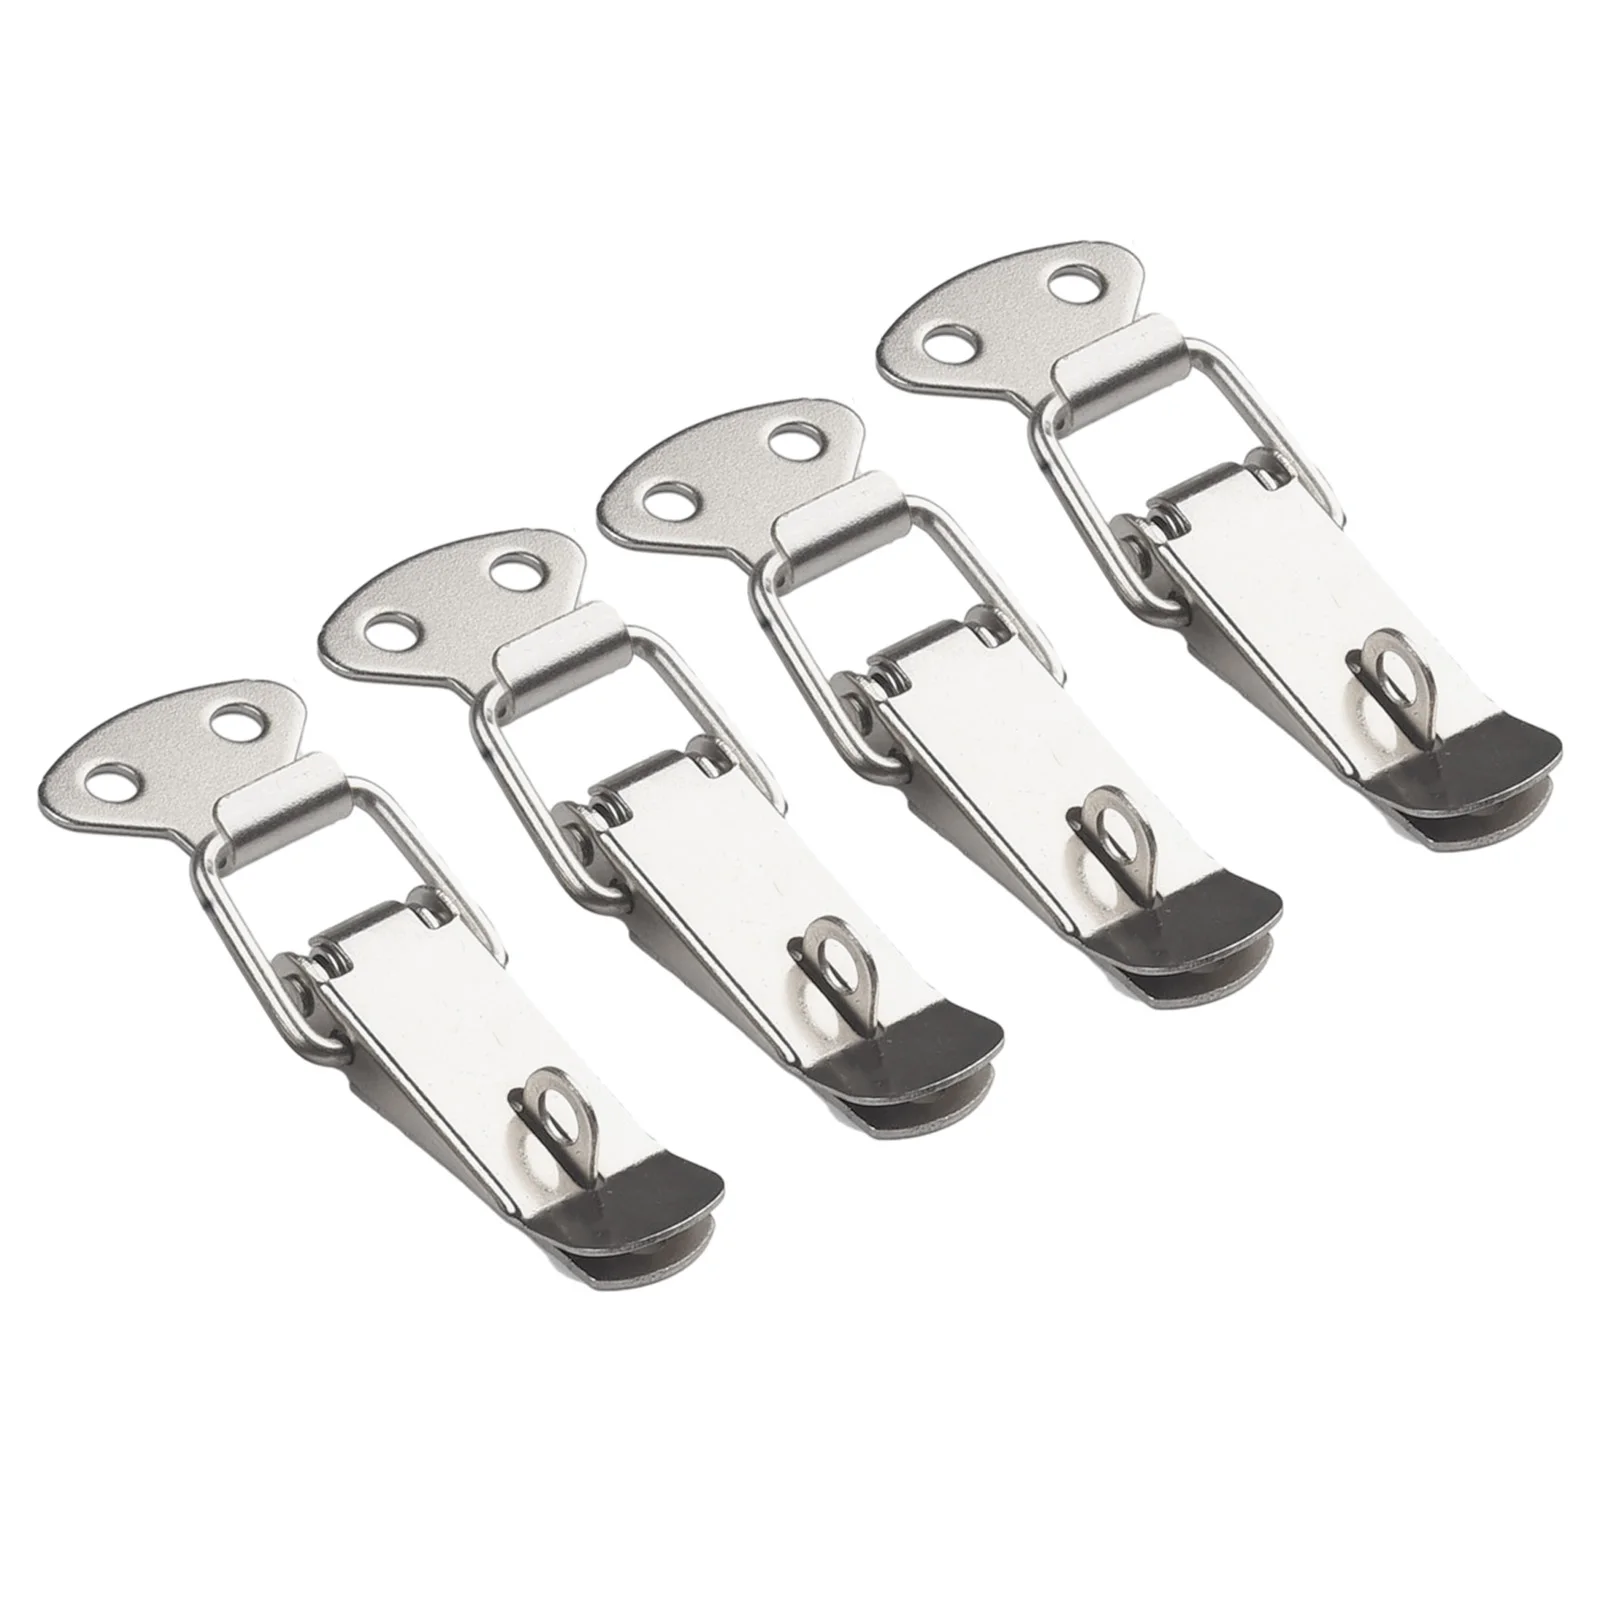 4Pcs Latch Catch Duck-mouth Buckle Hook Wooden Box Hasps Clamp Stainless Steel Spring Catch Clasp Loaded Draw Toggle Clamp Hasps